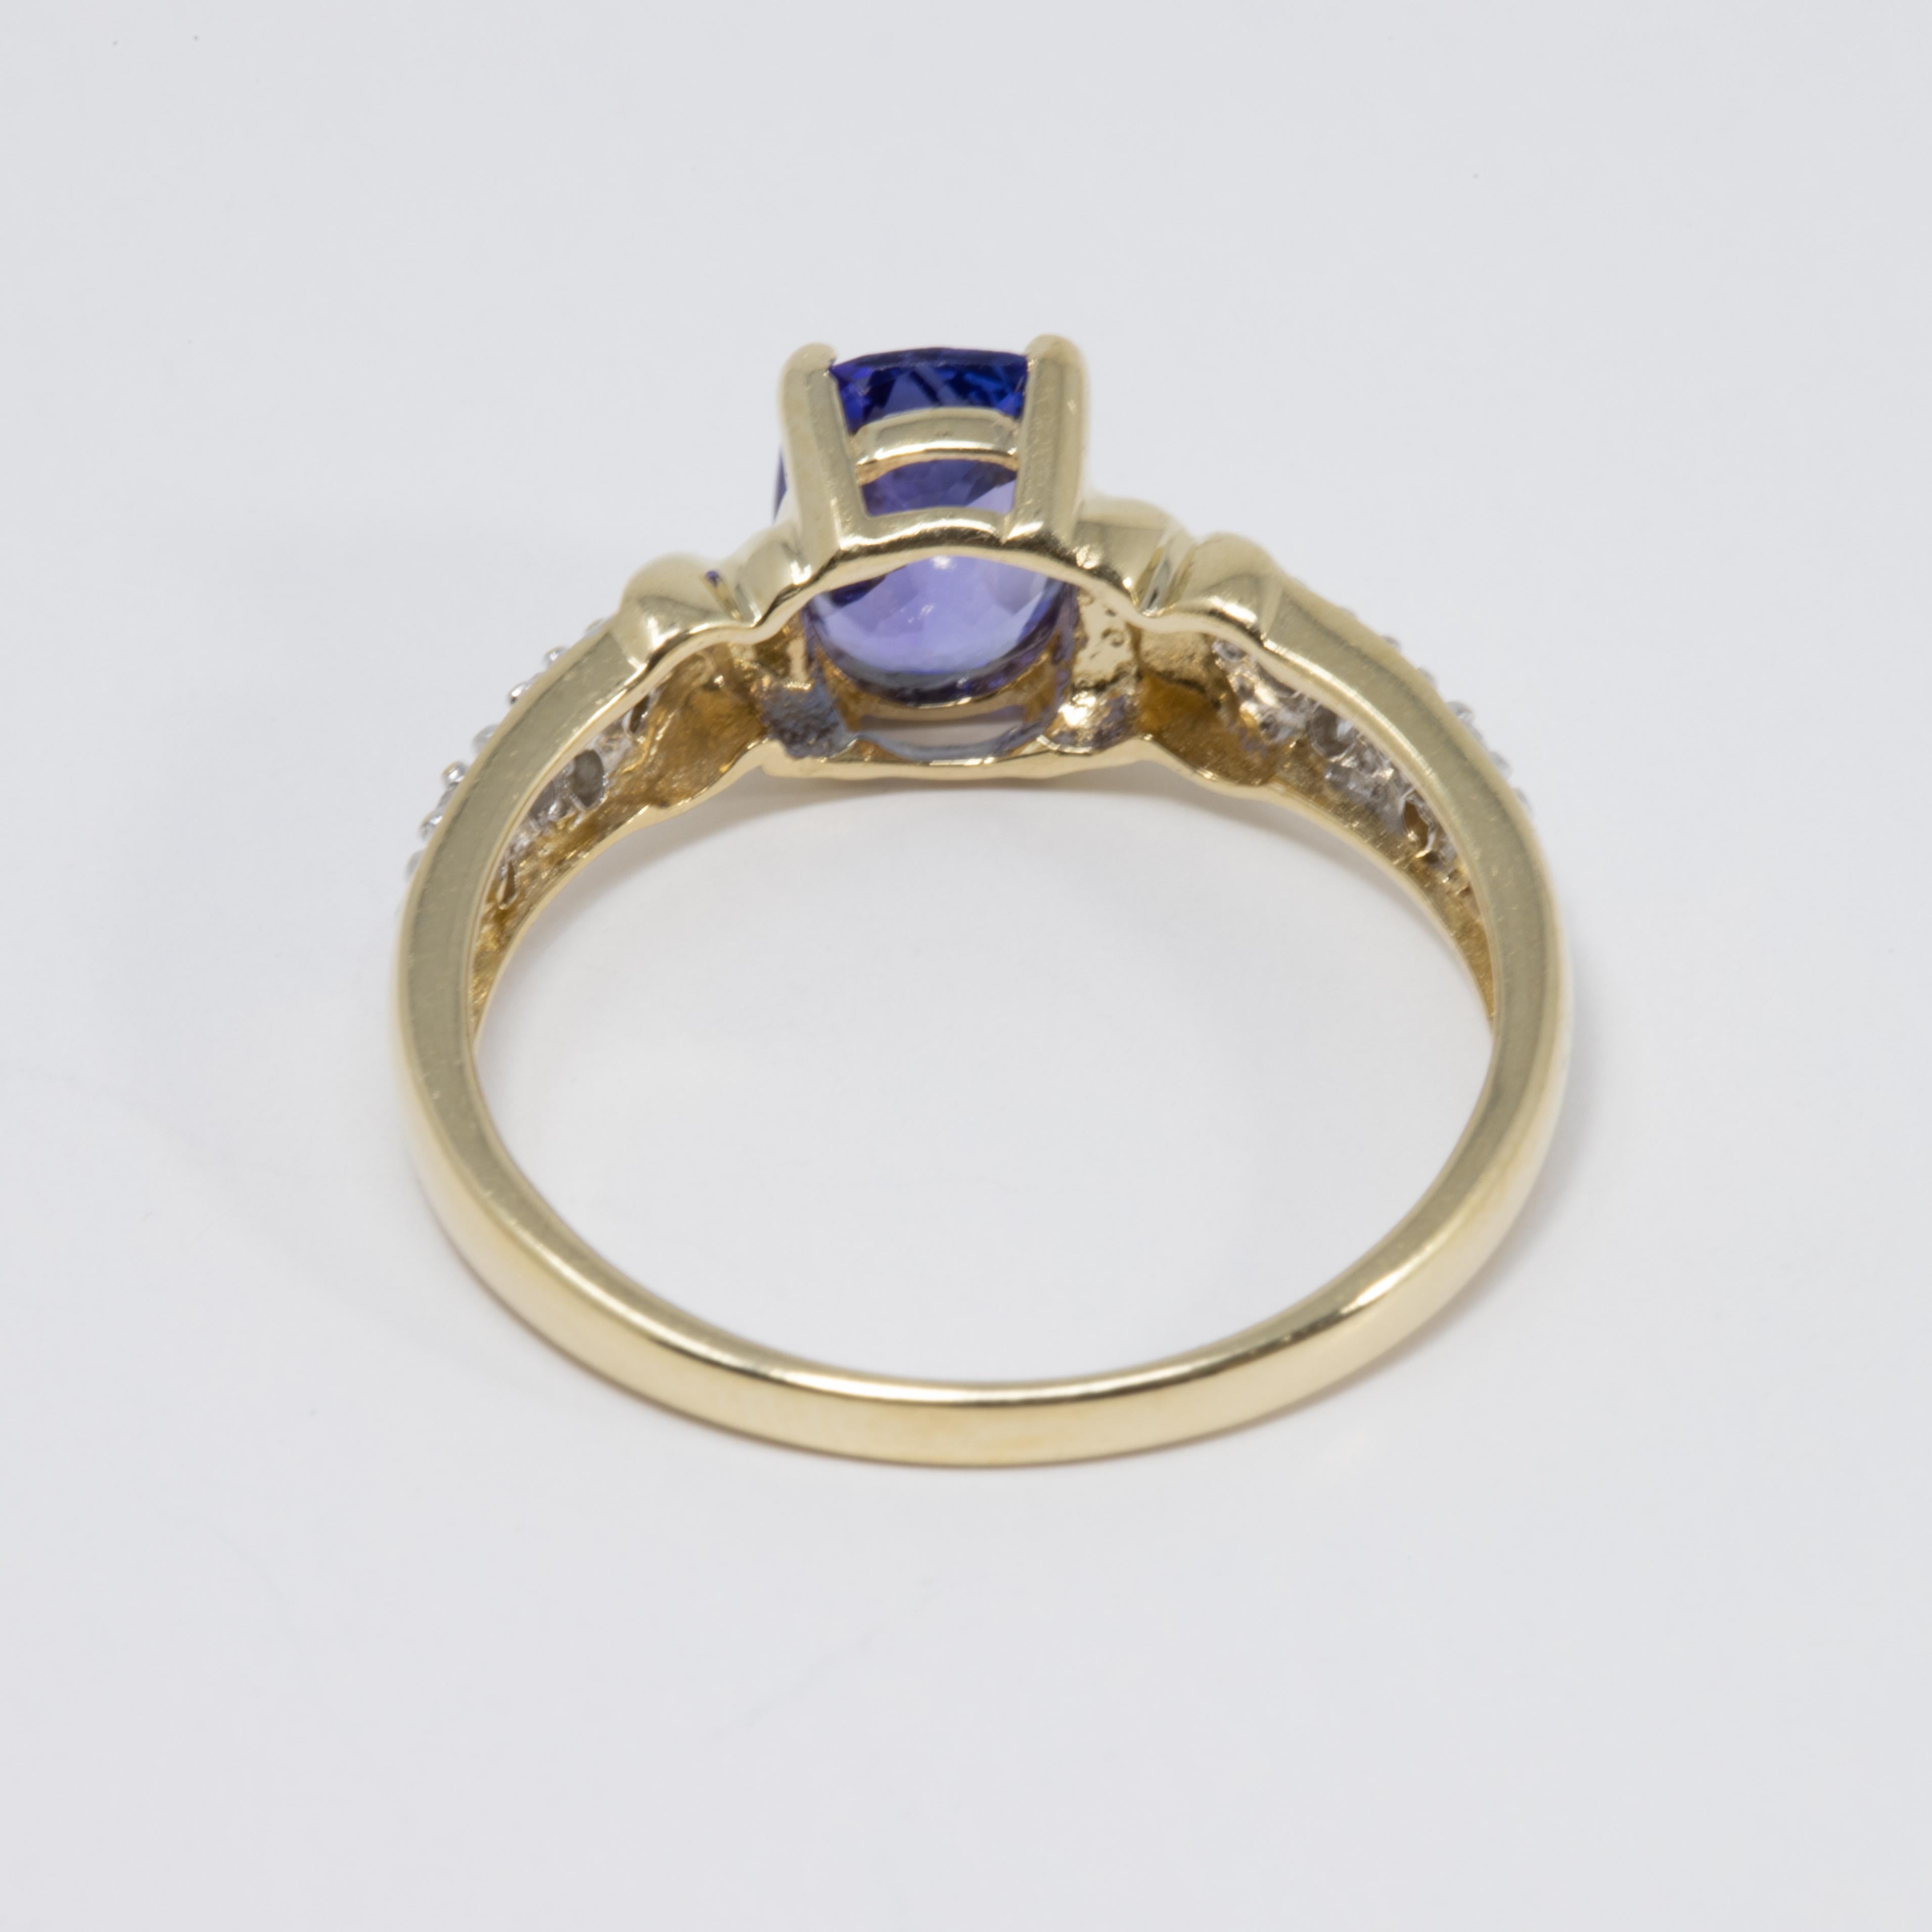 Mixed Cut Amethyst and Diamond 10 Karat Yellow Gold Ring, Solitaire Prong Setting For Sale